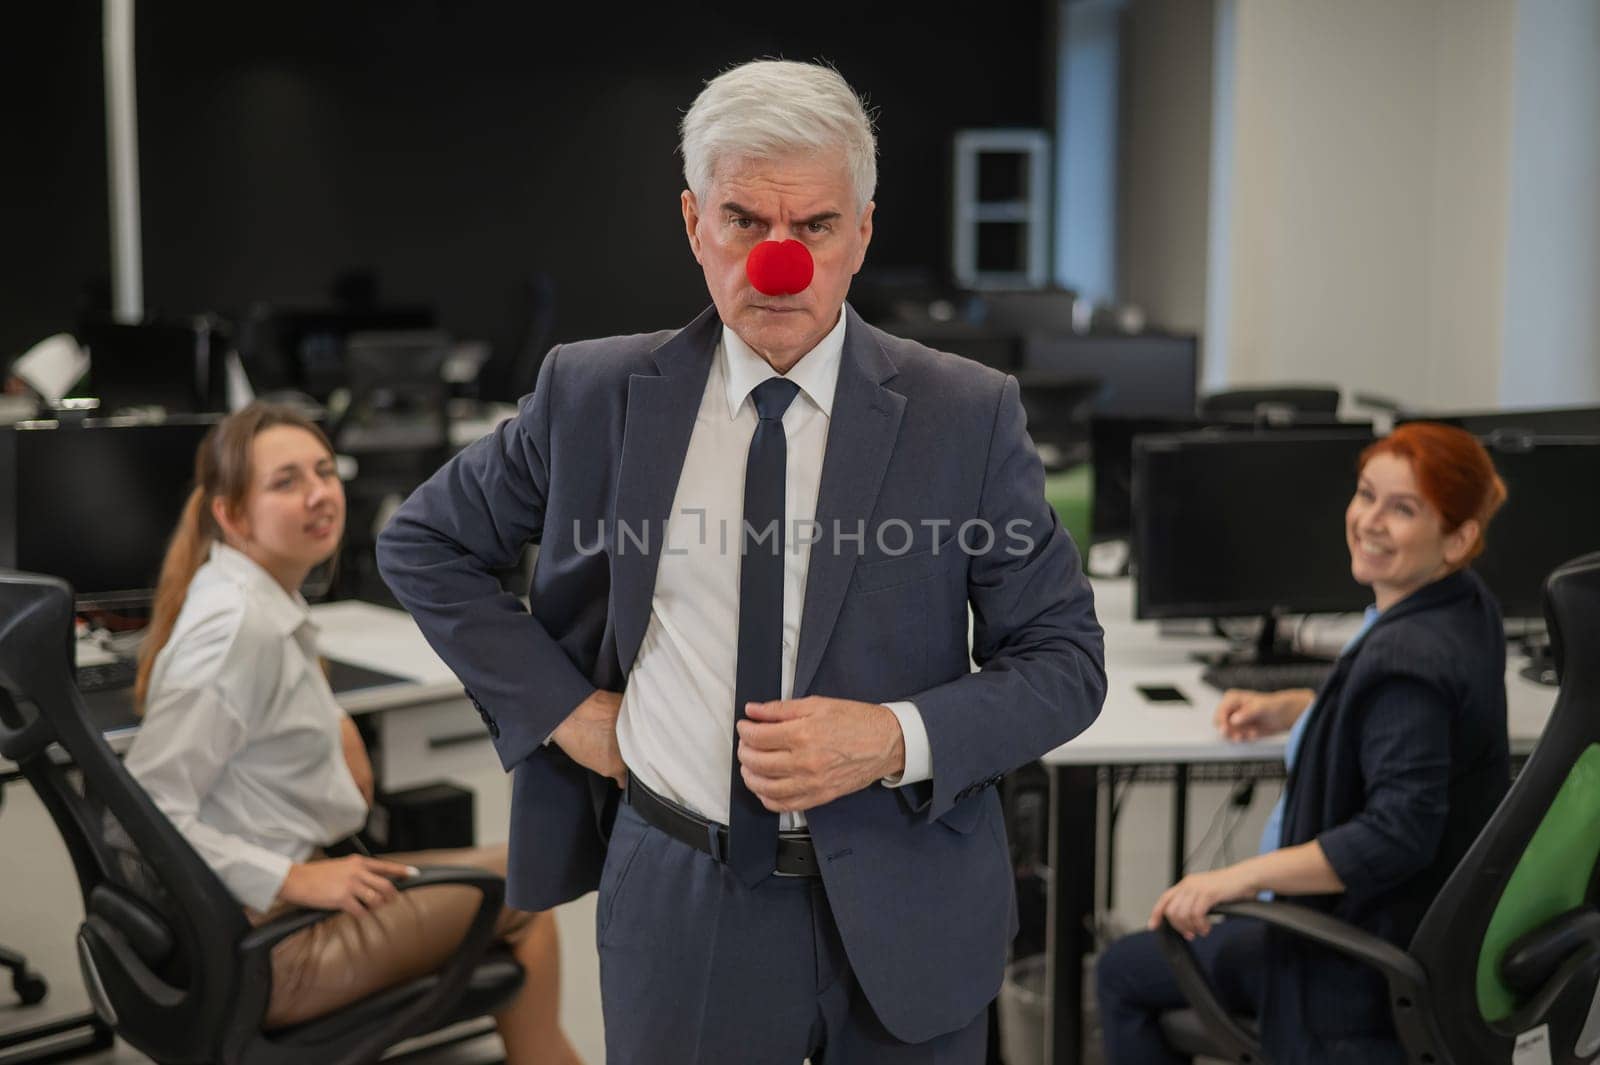 Two Caucasian women look at a serious elderly man with a clown nose in the office